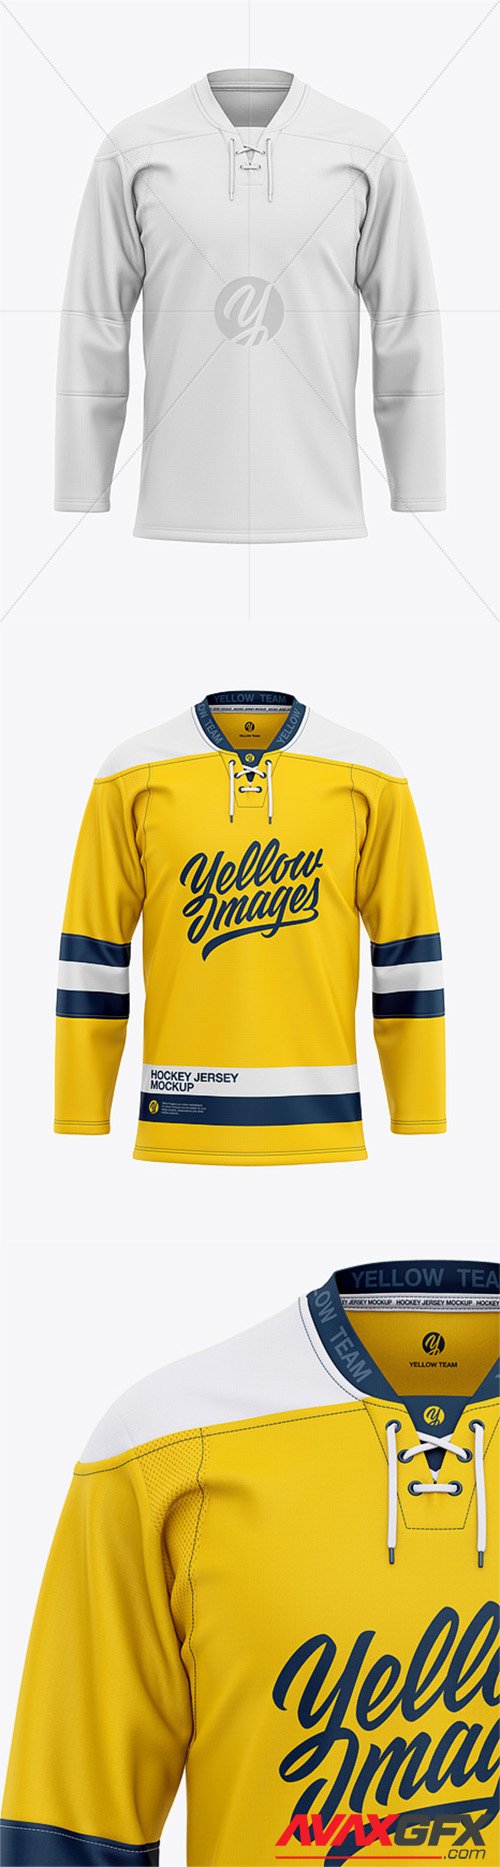 Men’s Lace Neck Hockey Jersey Mockup - Front View 40199